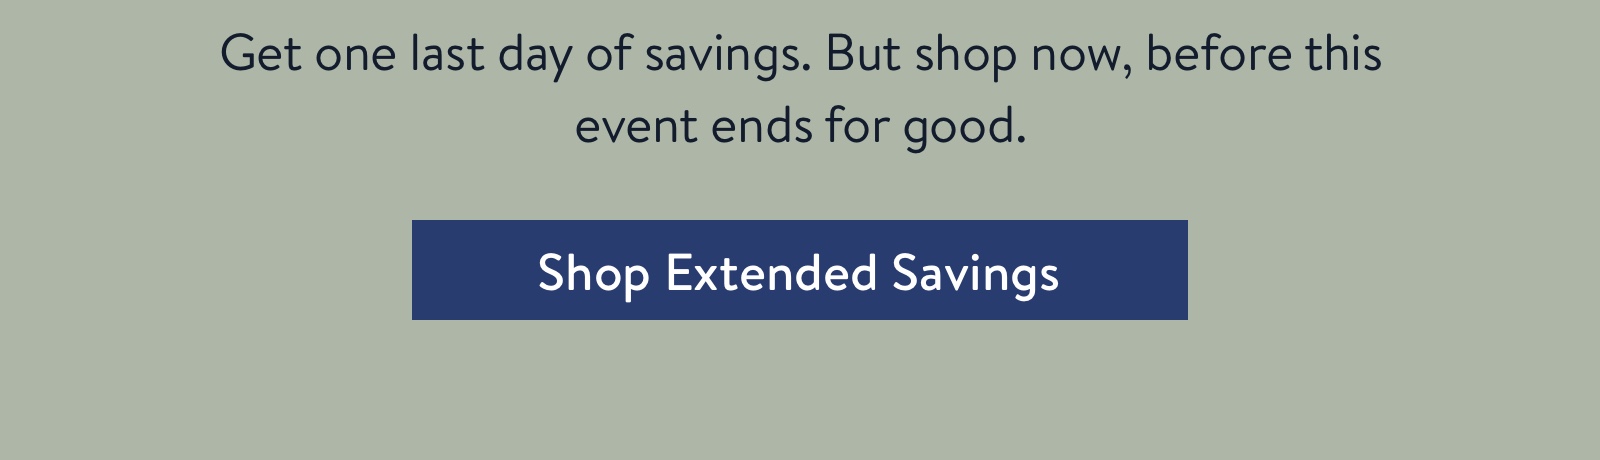 Get one last day of savings. But shop now, before this event ends for good.